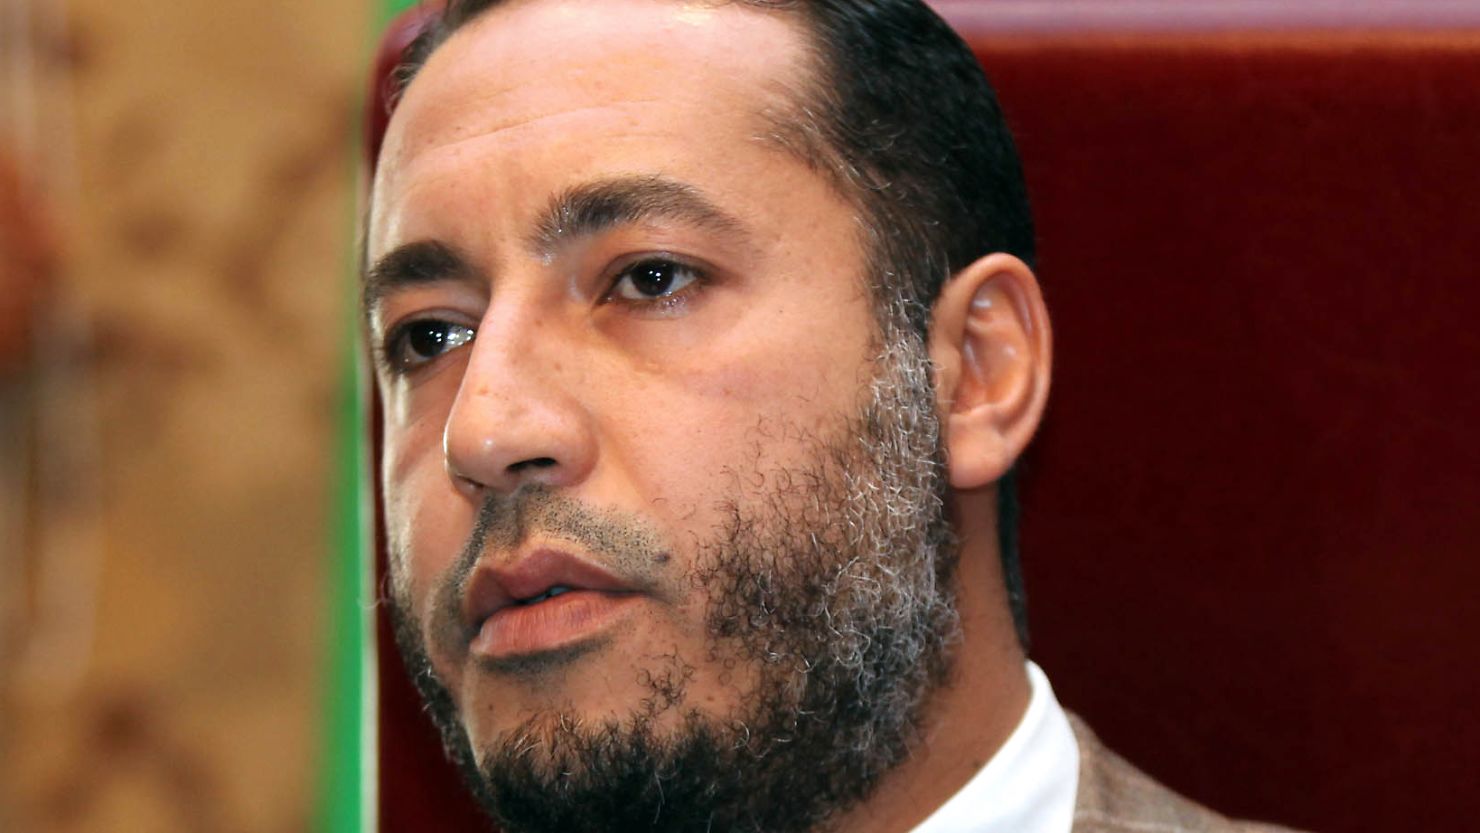 Saadi Gadhafi, pictured in January 2010, is under a travel ban. 